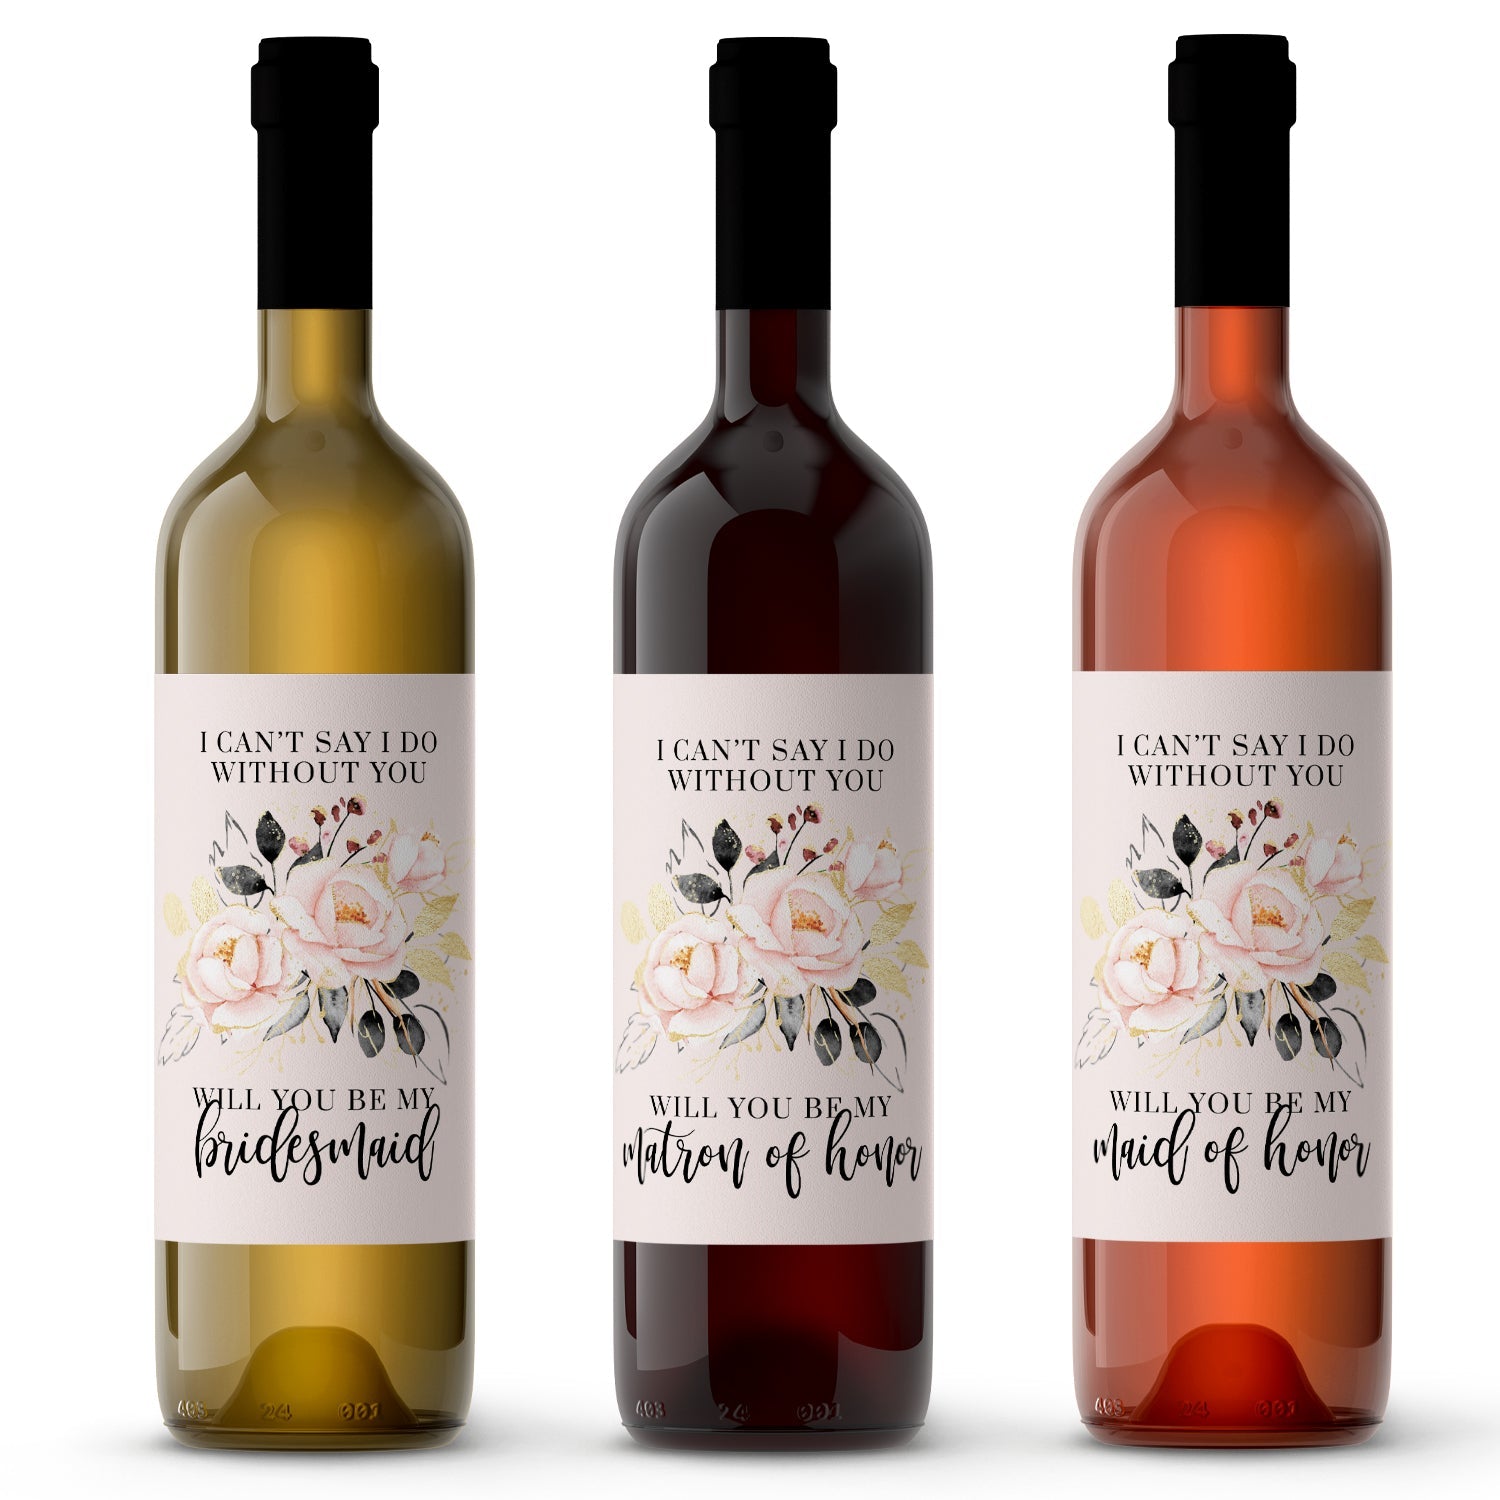 Add a personalized touch to your bridal party gifts with our custom bridesmaid stickers and wine labels. Designed to celebrate your closest friends, these labels are the perfect way to ask, ‘Will you be my bridesmaid?’ with elegance and love.